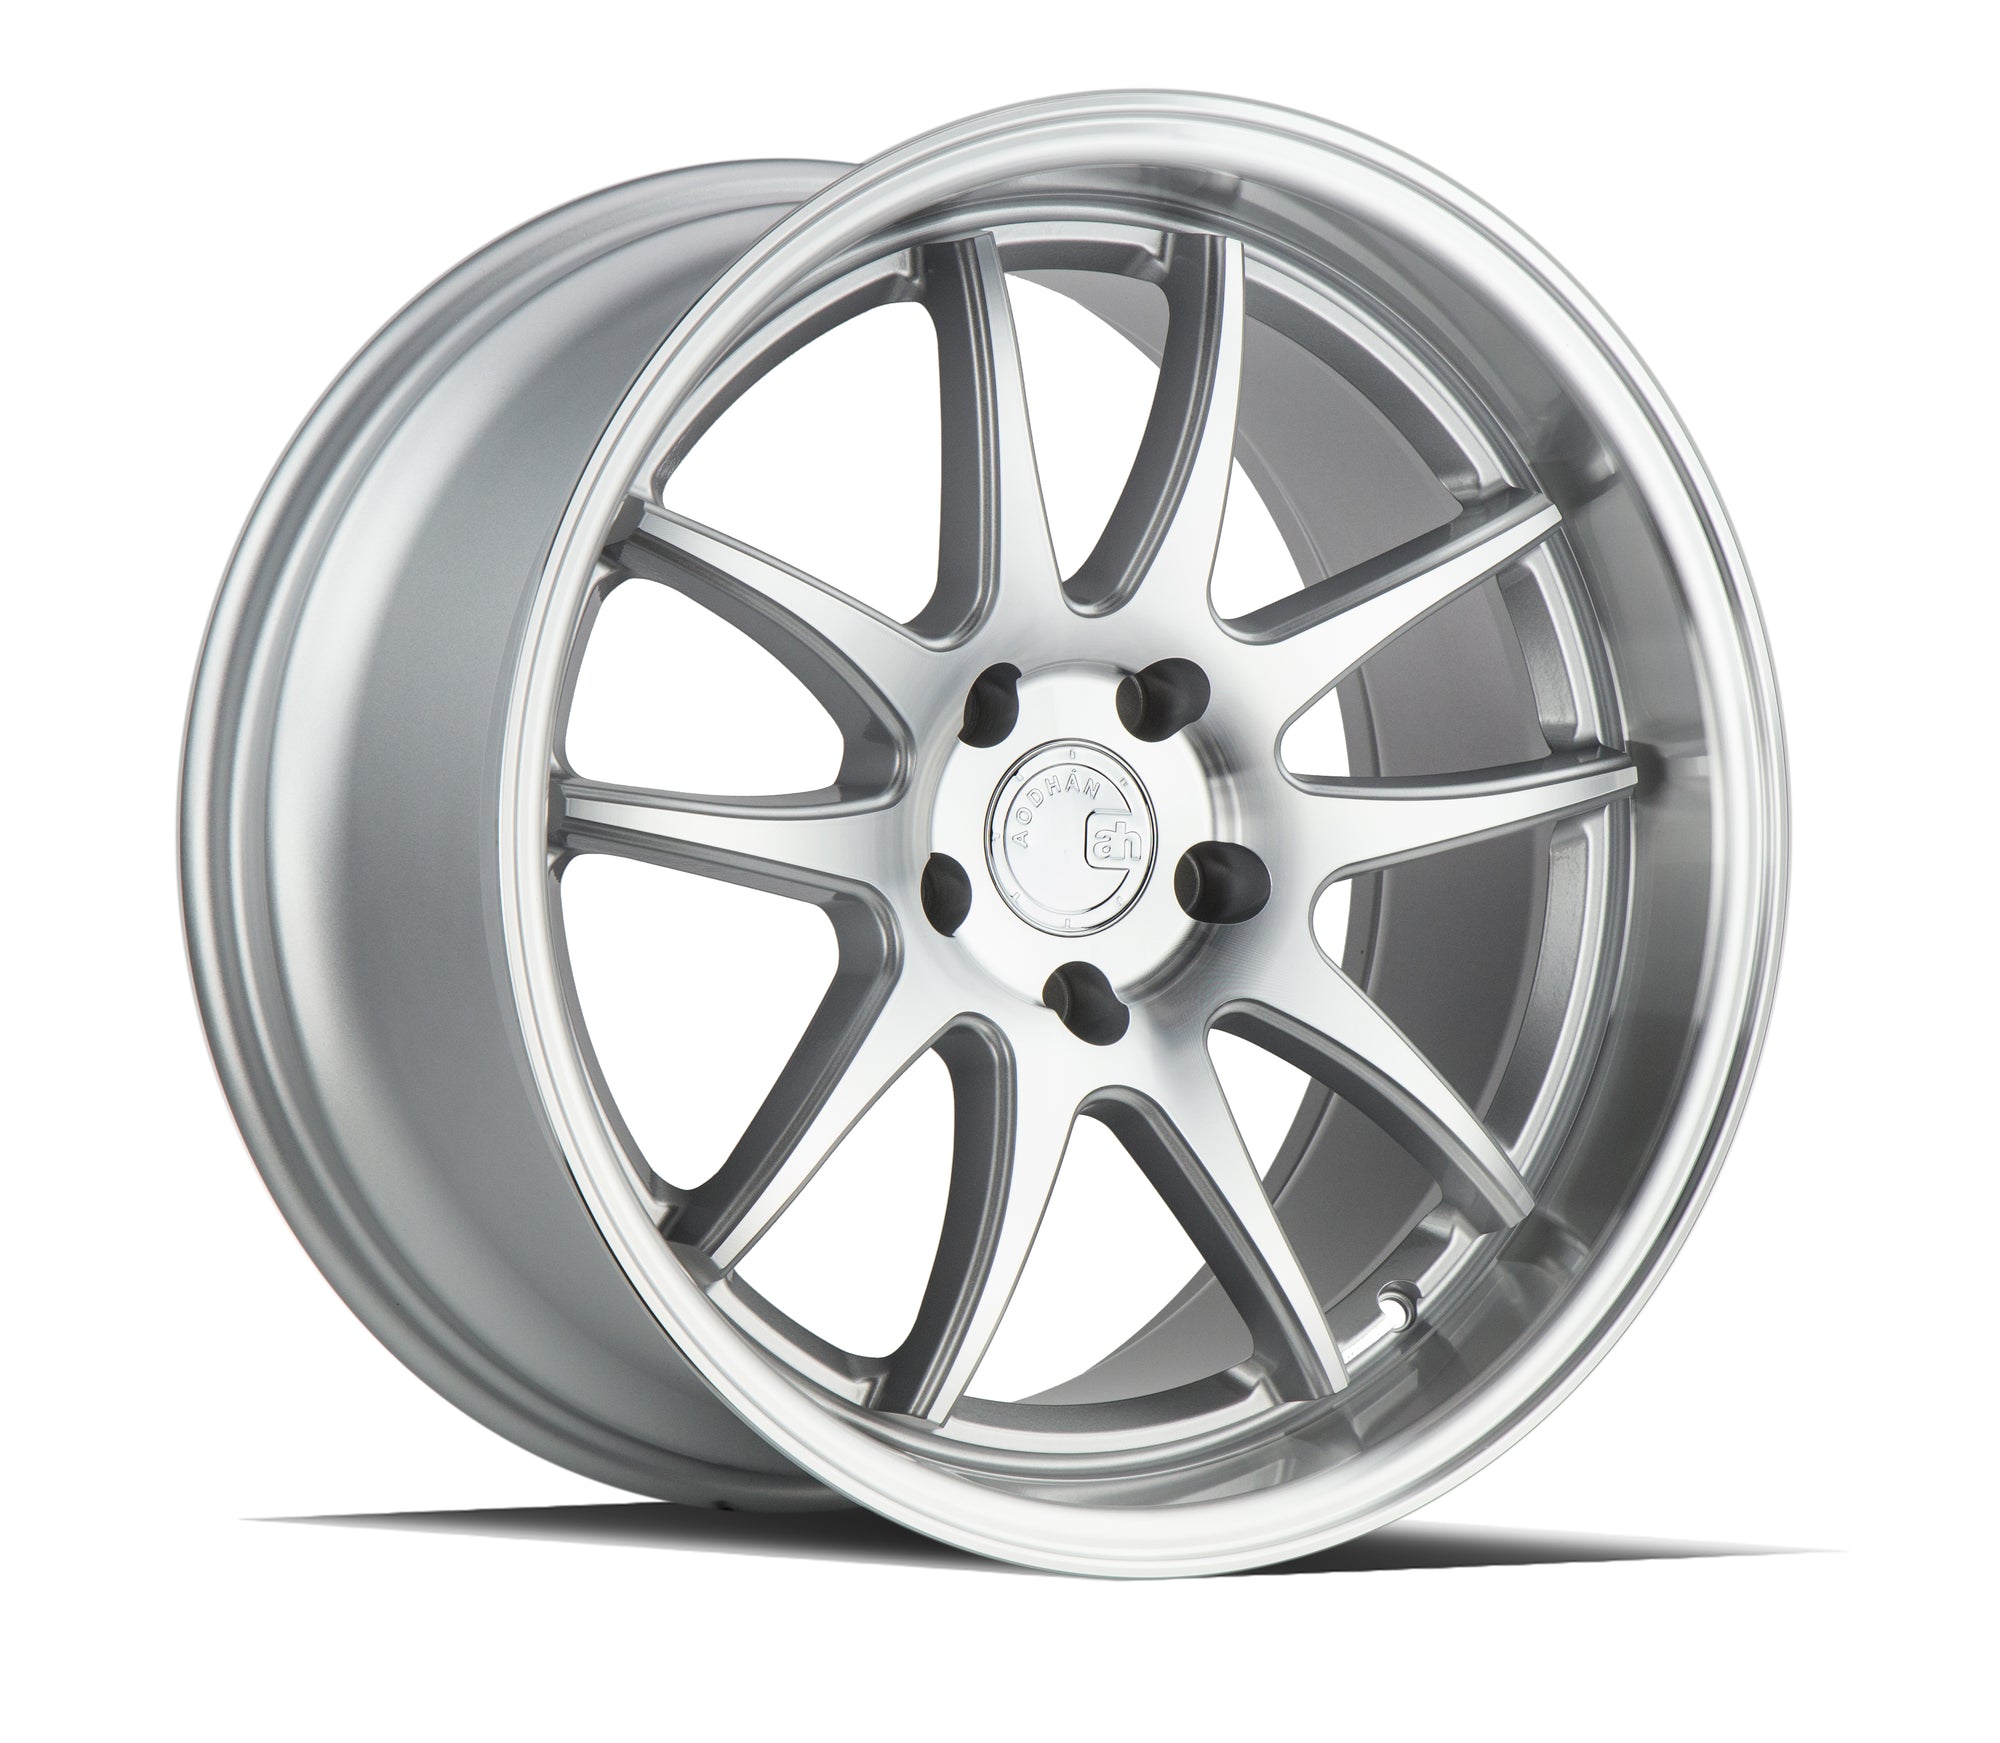 Aodhan DS02 18x9.5 5x114.3 +22 Silver w/Machined Face